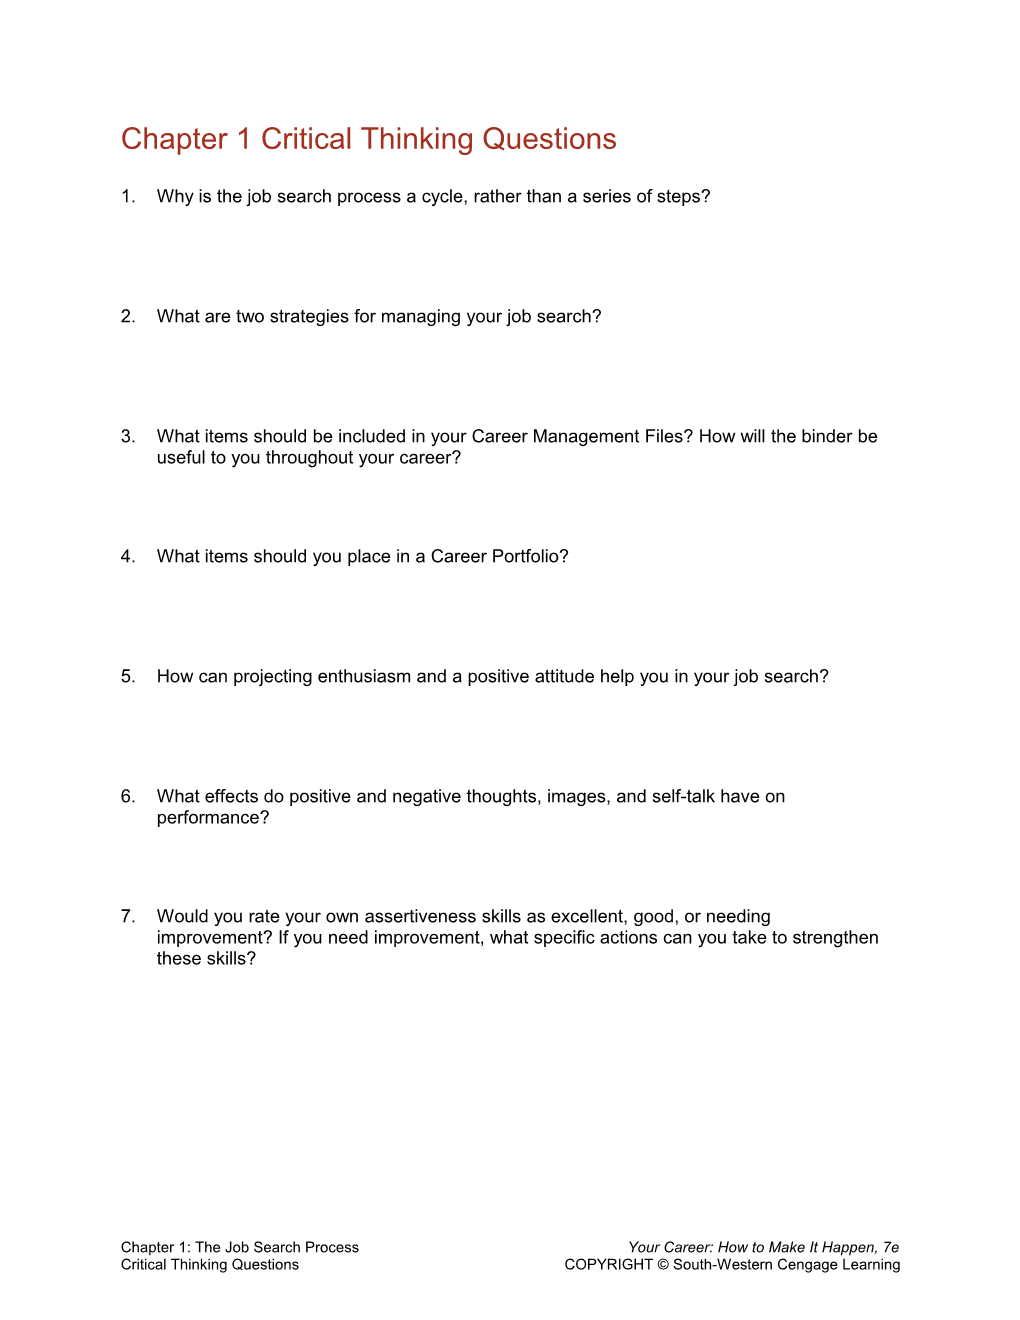 Chapter 1 Critical Thinking Questions